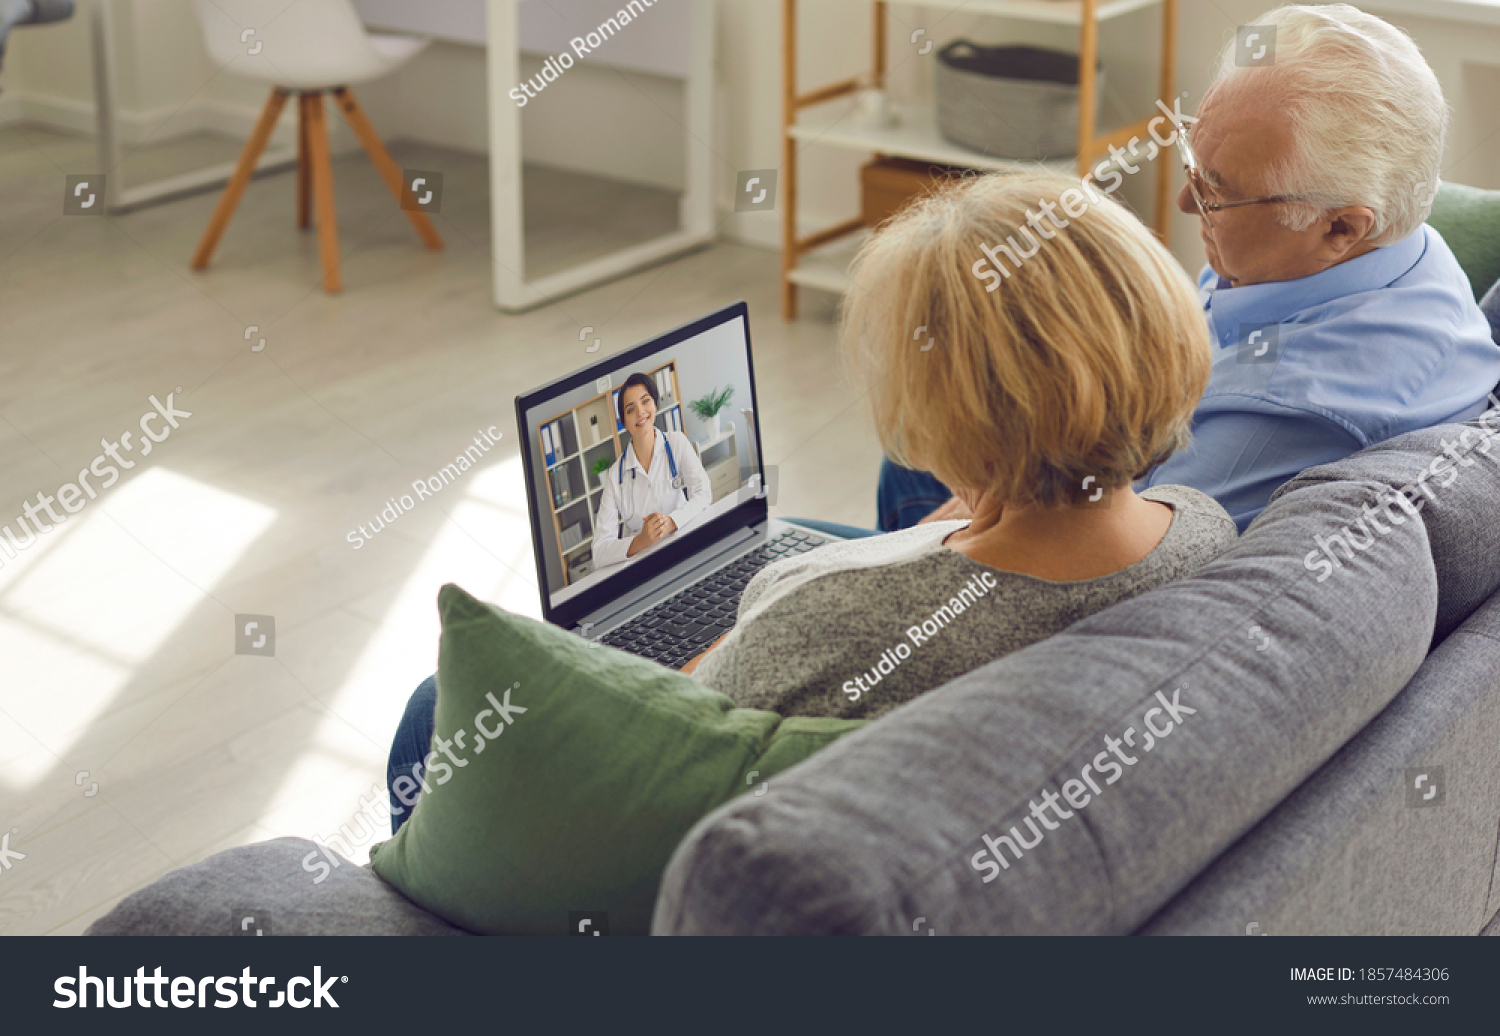 Using eHealth and telemedicine services at home. Couple of senior patients sitting on sofa with laptop, having video call with online doctor and getting professional health consultation #1857484306